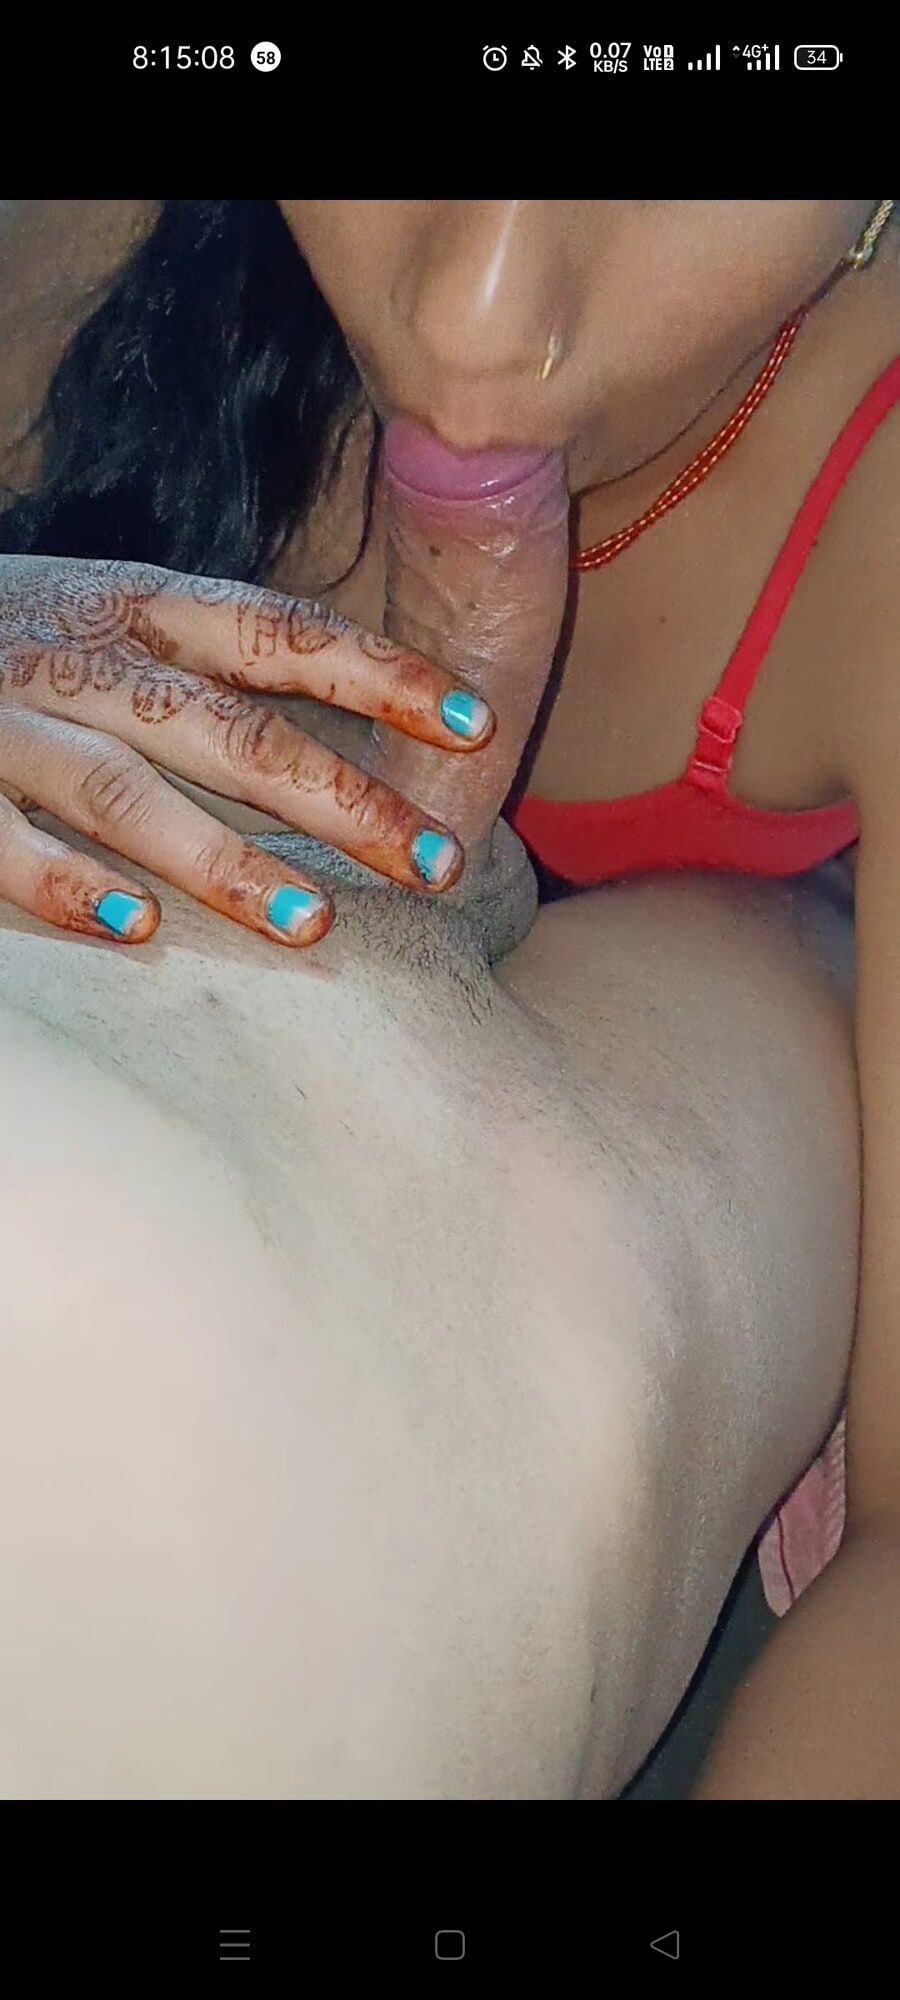 Me and my horny wife jiya .have some fun time photos  #51